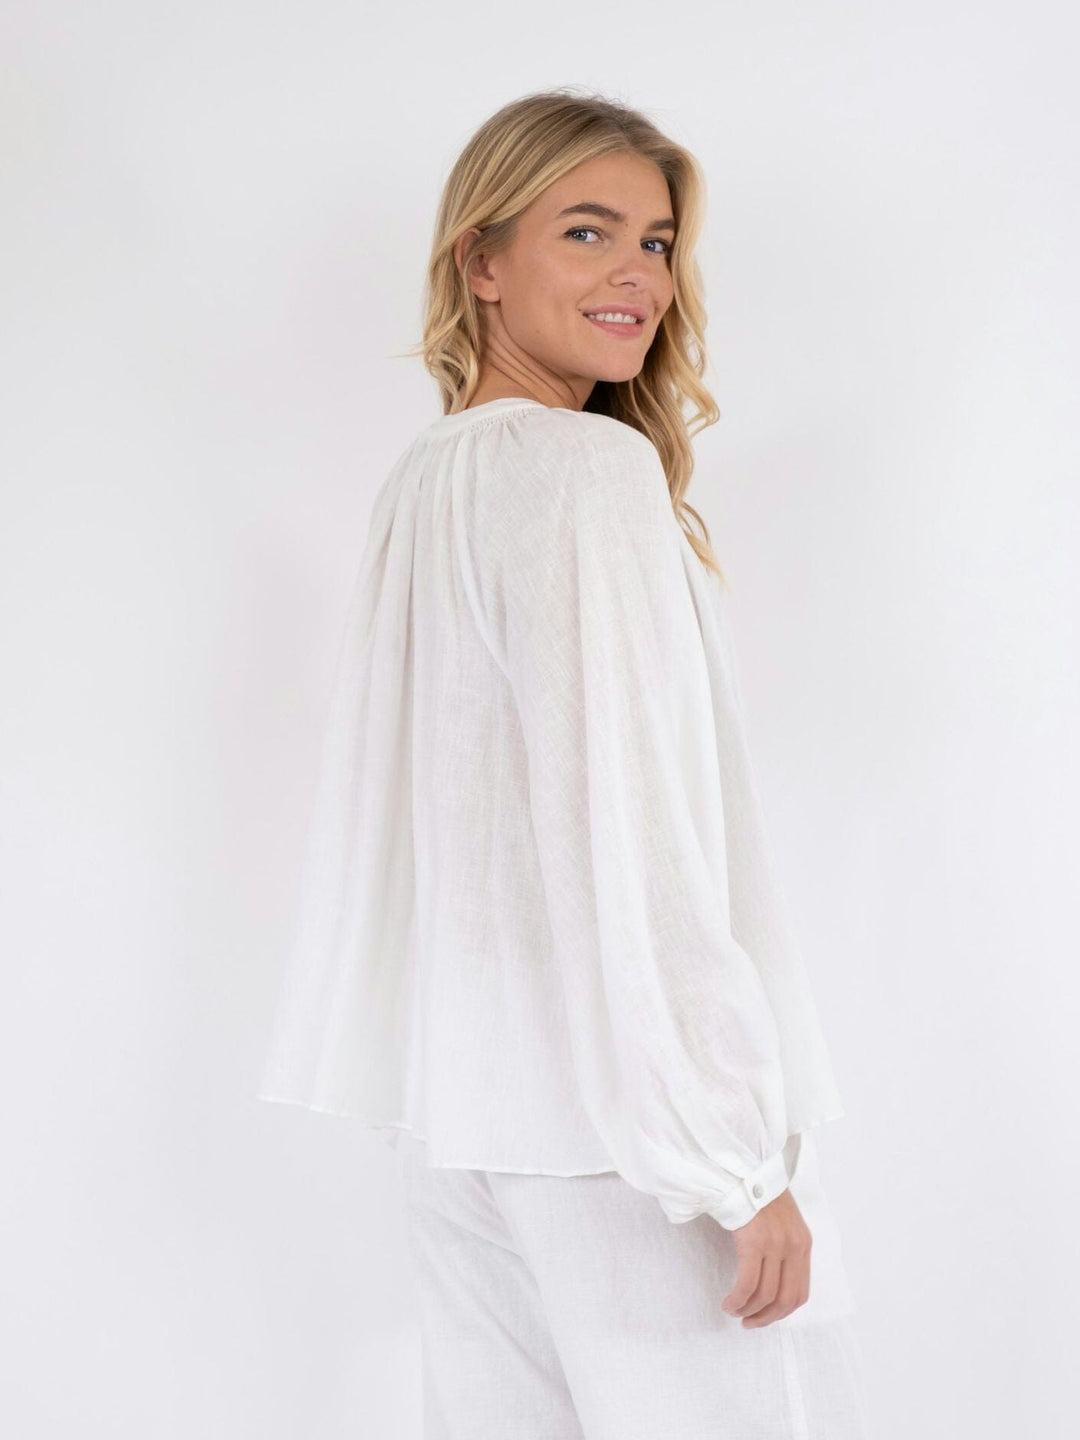 Neo Noir - Kirsty Solid Blouse - White Bluser 